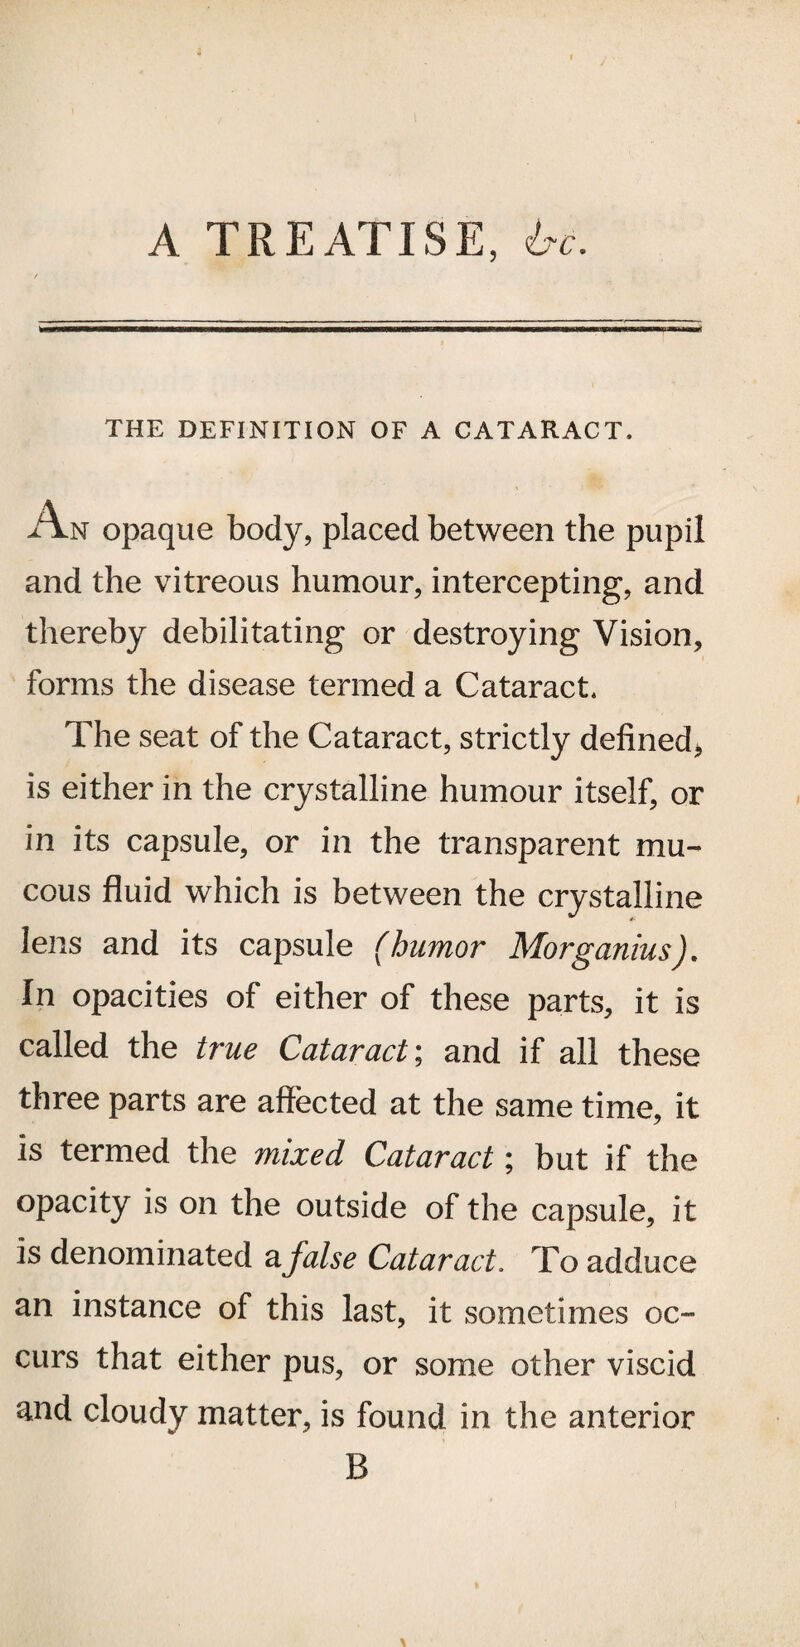 A TREATISE , l?c. THE DEFINITION OF A CATARACT. An opaque body, placed between the pupil and the vitreous humour, intercepting, and thereby debilitating or destroying Vision, forms the disease termed a Cataract. The seat of the Cataract, strictly defined, is either in the crystalline humour itself, or in its capsule, or in the transparent mu¬ cous fluid which is between the crystalline lens and its capsule (humor Morganius). In opacities of either of these parts, it is called the true Cataract; and if all these three parts are affected at the same time, it is termed the mixed Cataract; but if the opacity is on the outside of the capsule, it is denominated a false Cataract. To adduce an instance of this last, it sometimes oc¬ curs that either pus, or some other viscid and cloudy matter, is found in the anterior B